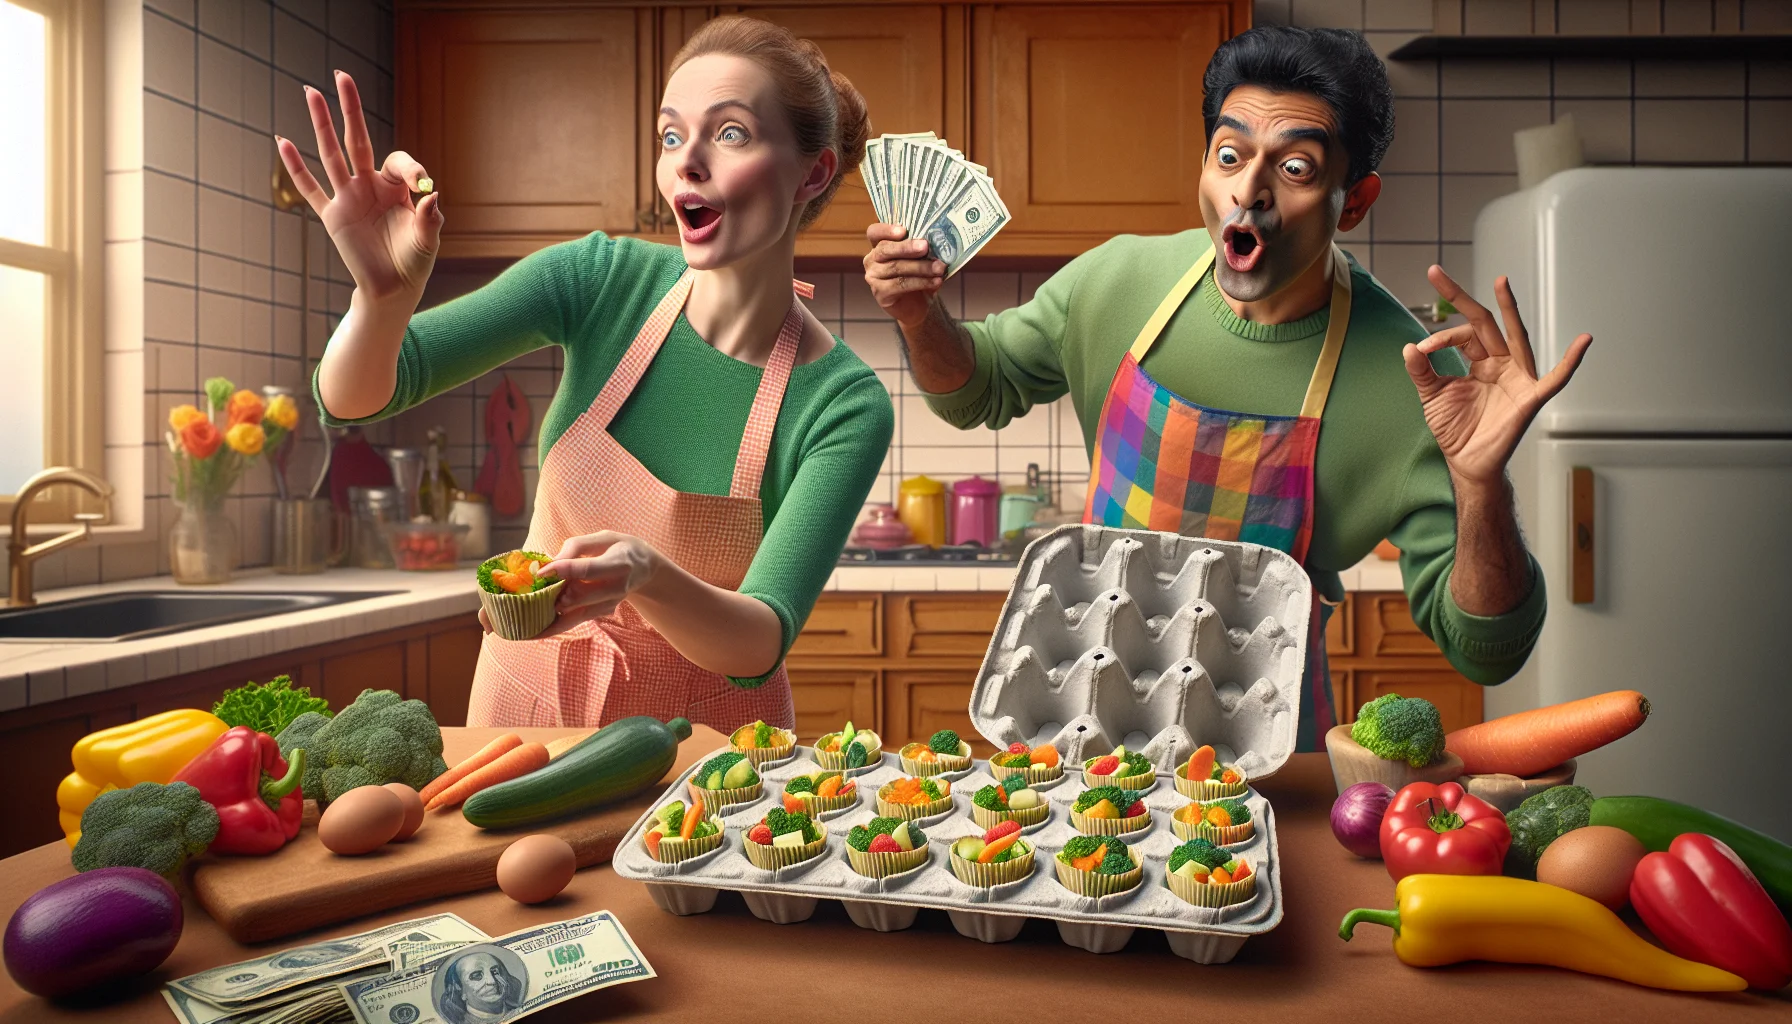 Visualize a whimsical and realistic kitchen scene where Egg Carton Muffin Tins are being used to encourage eating healthy on a budget. The image showcases a Caucasian woman and a South Asian man engaging in a playful cooking session. The woman is filling the carton designed muffin tins with a mix of vibrant, fresh vegetables while the man is motioning towards the filled tins with an exaggerated expression of surprise. He holds a bundle of money in his other hand, symbolizing savings. The ambience is full of merriment with colourful aprons, kitchen utensils, and a healthy, lustrous muffin on the counter to entice viewers.